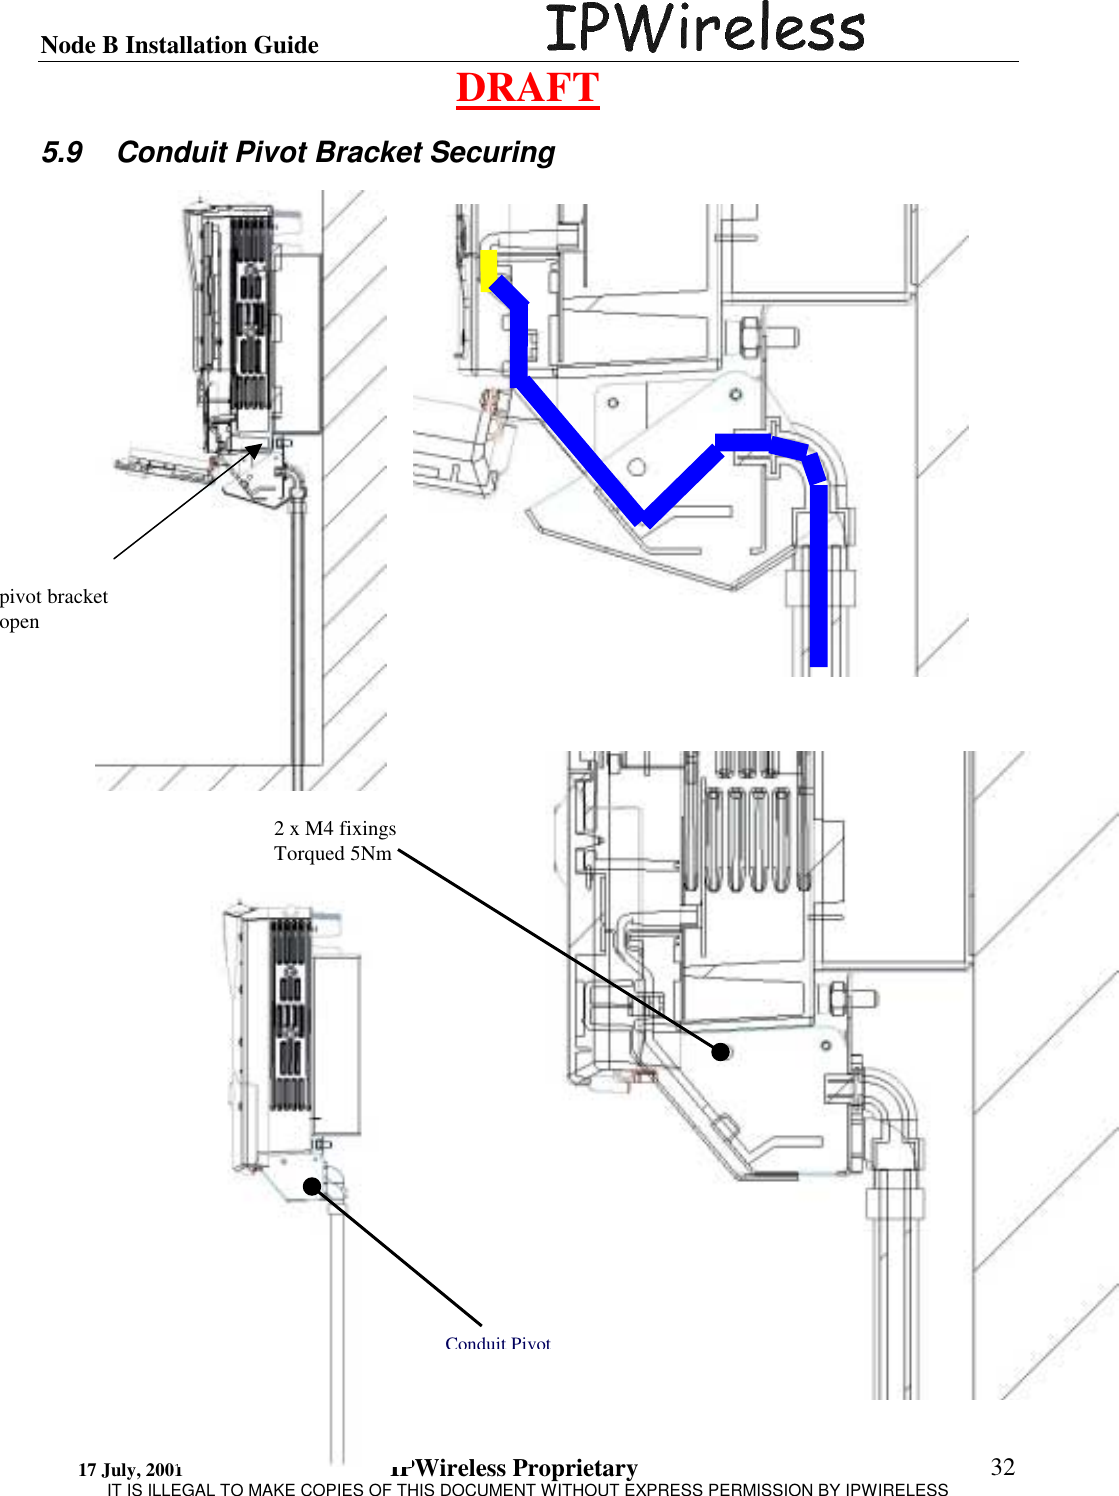 Node B Installation Guide                                      DRAFT 17 July, 2001                                 IPWireless Proprietary                                                  IT IS ILLEGAL TO MAKE COPIES OF THIS DOCUMENT WITHOUT EXPRESS PERMISSION BY IPWIRELESS  32 5.9  Conduit Pivot Bracket Securing    2 x M4 fixings Torqued 5Nm Conduit Pivotpivot bracket open 